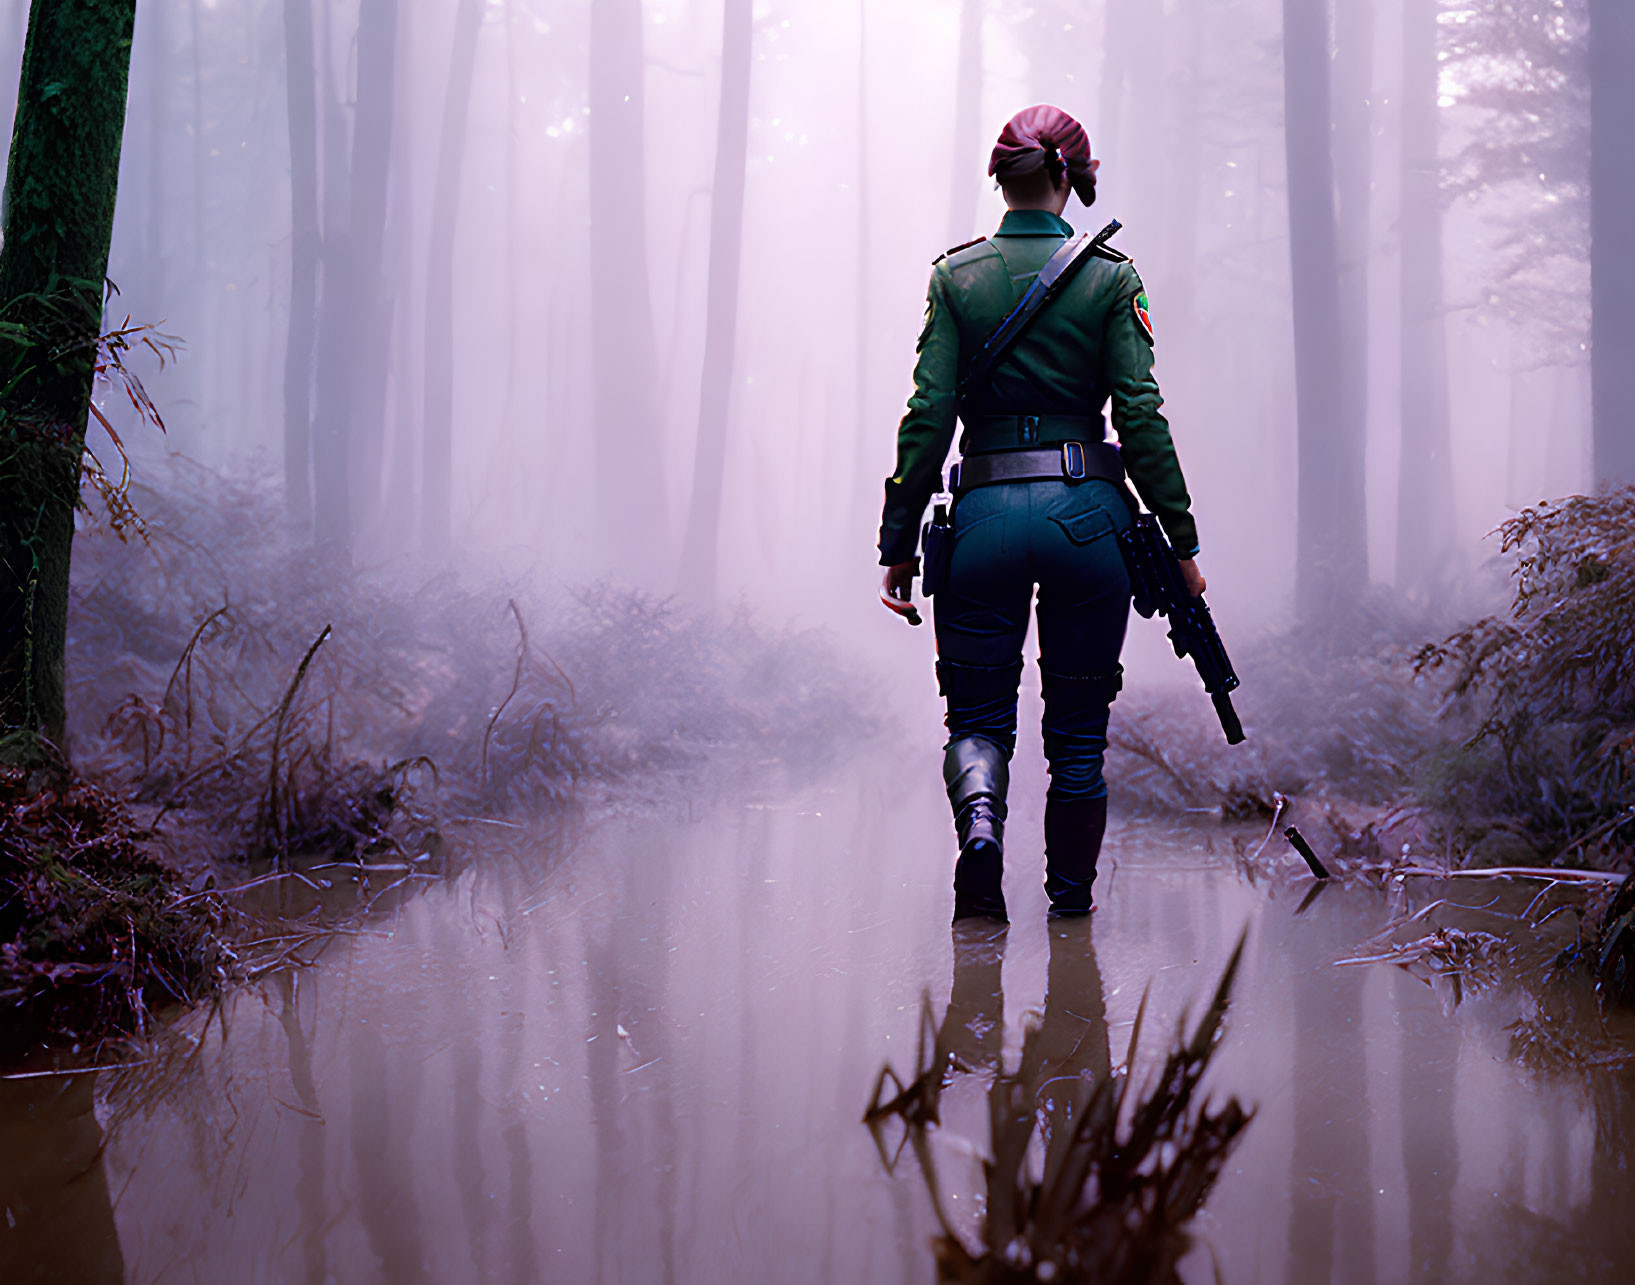 Person in Green Jacket Walking Through Misty Forest with Reflective Water